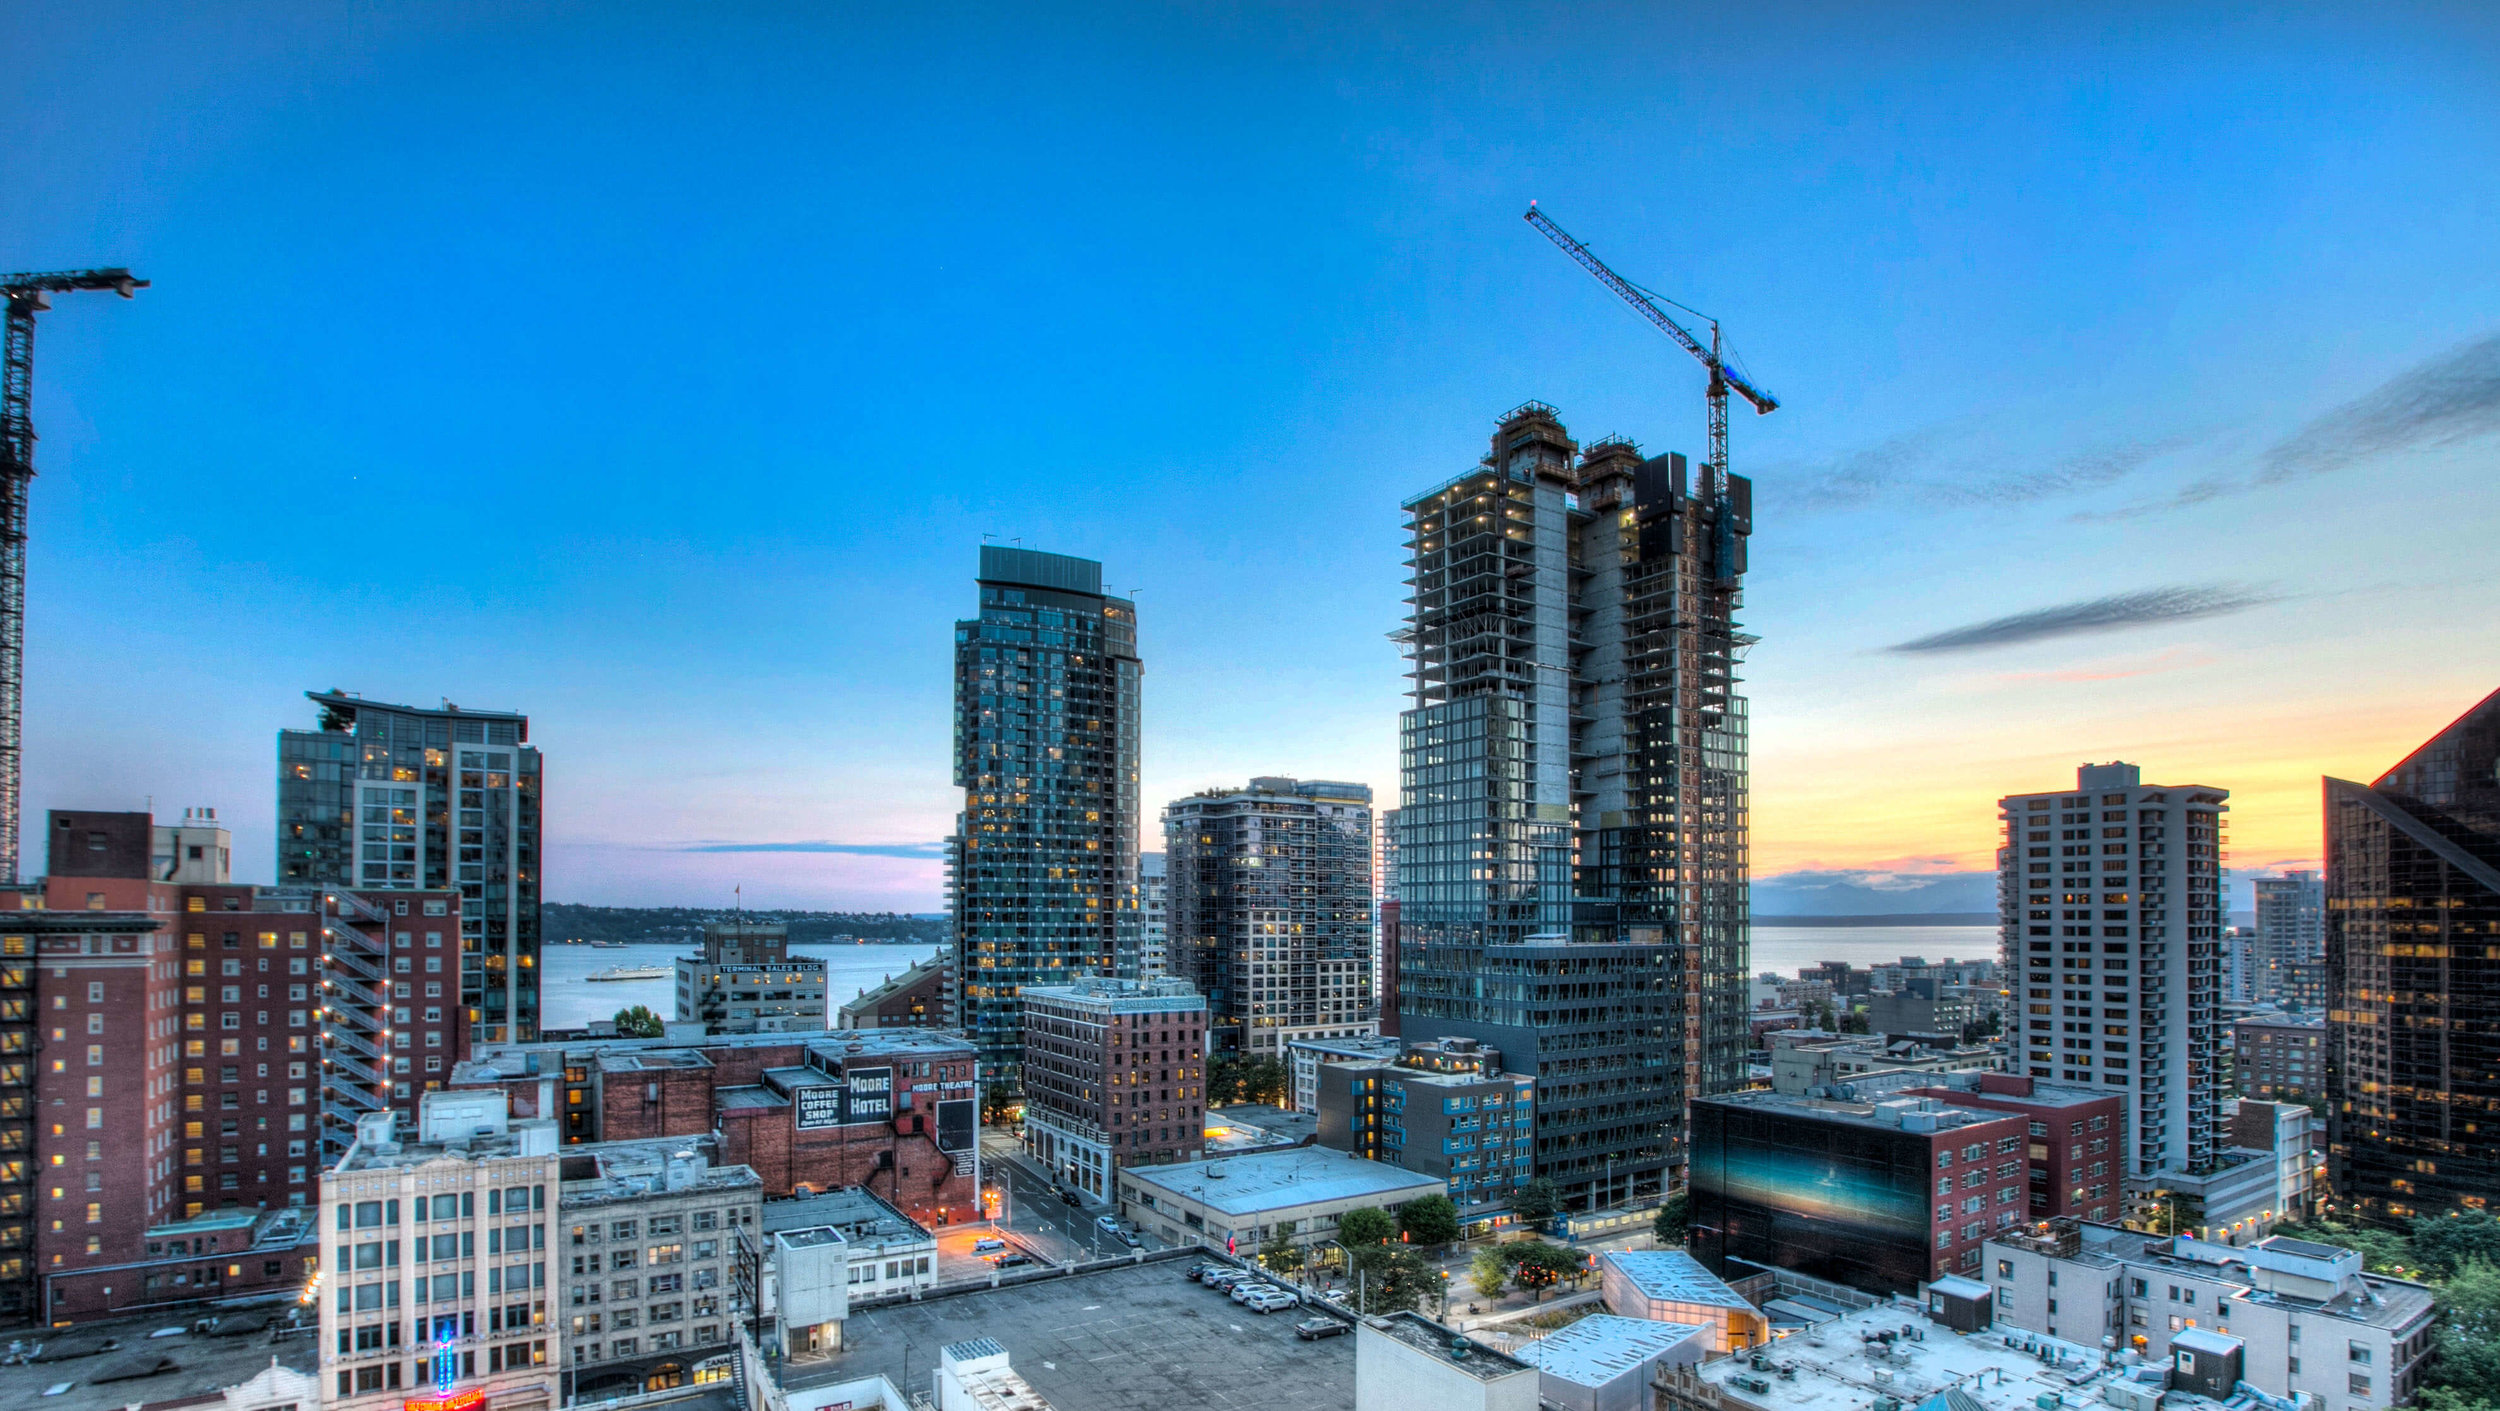 Escala-Luxury-Condo-For-Sale-Downtown-Seattle-Puget-Sound-Views.jpg